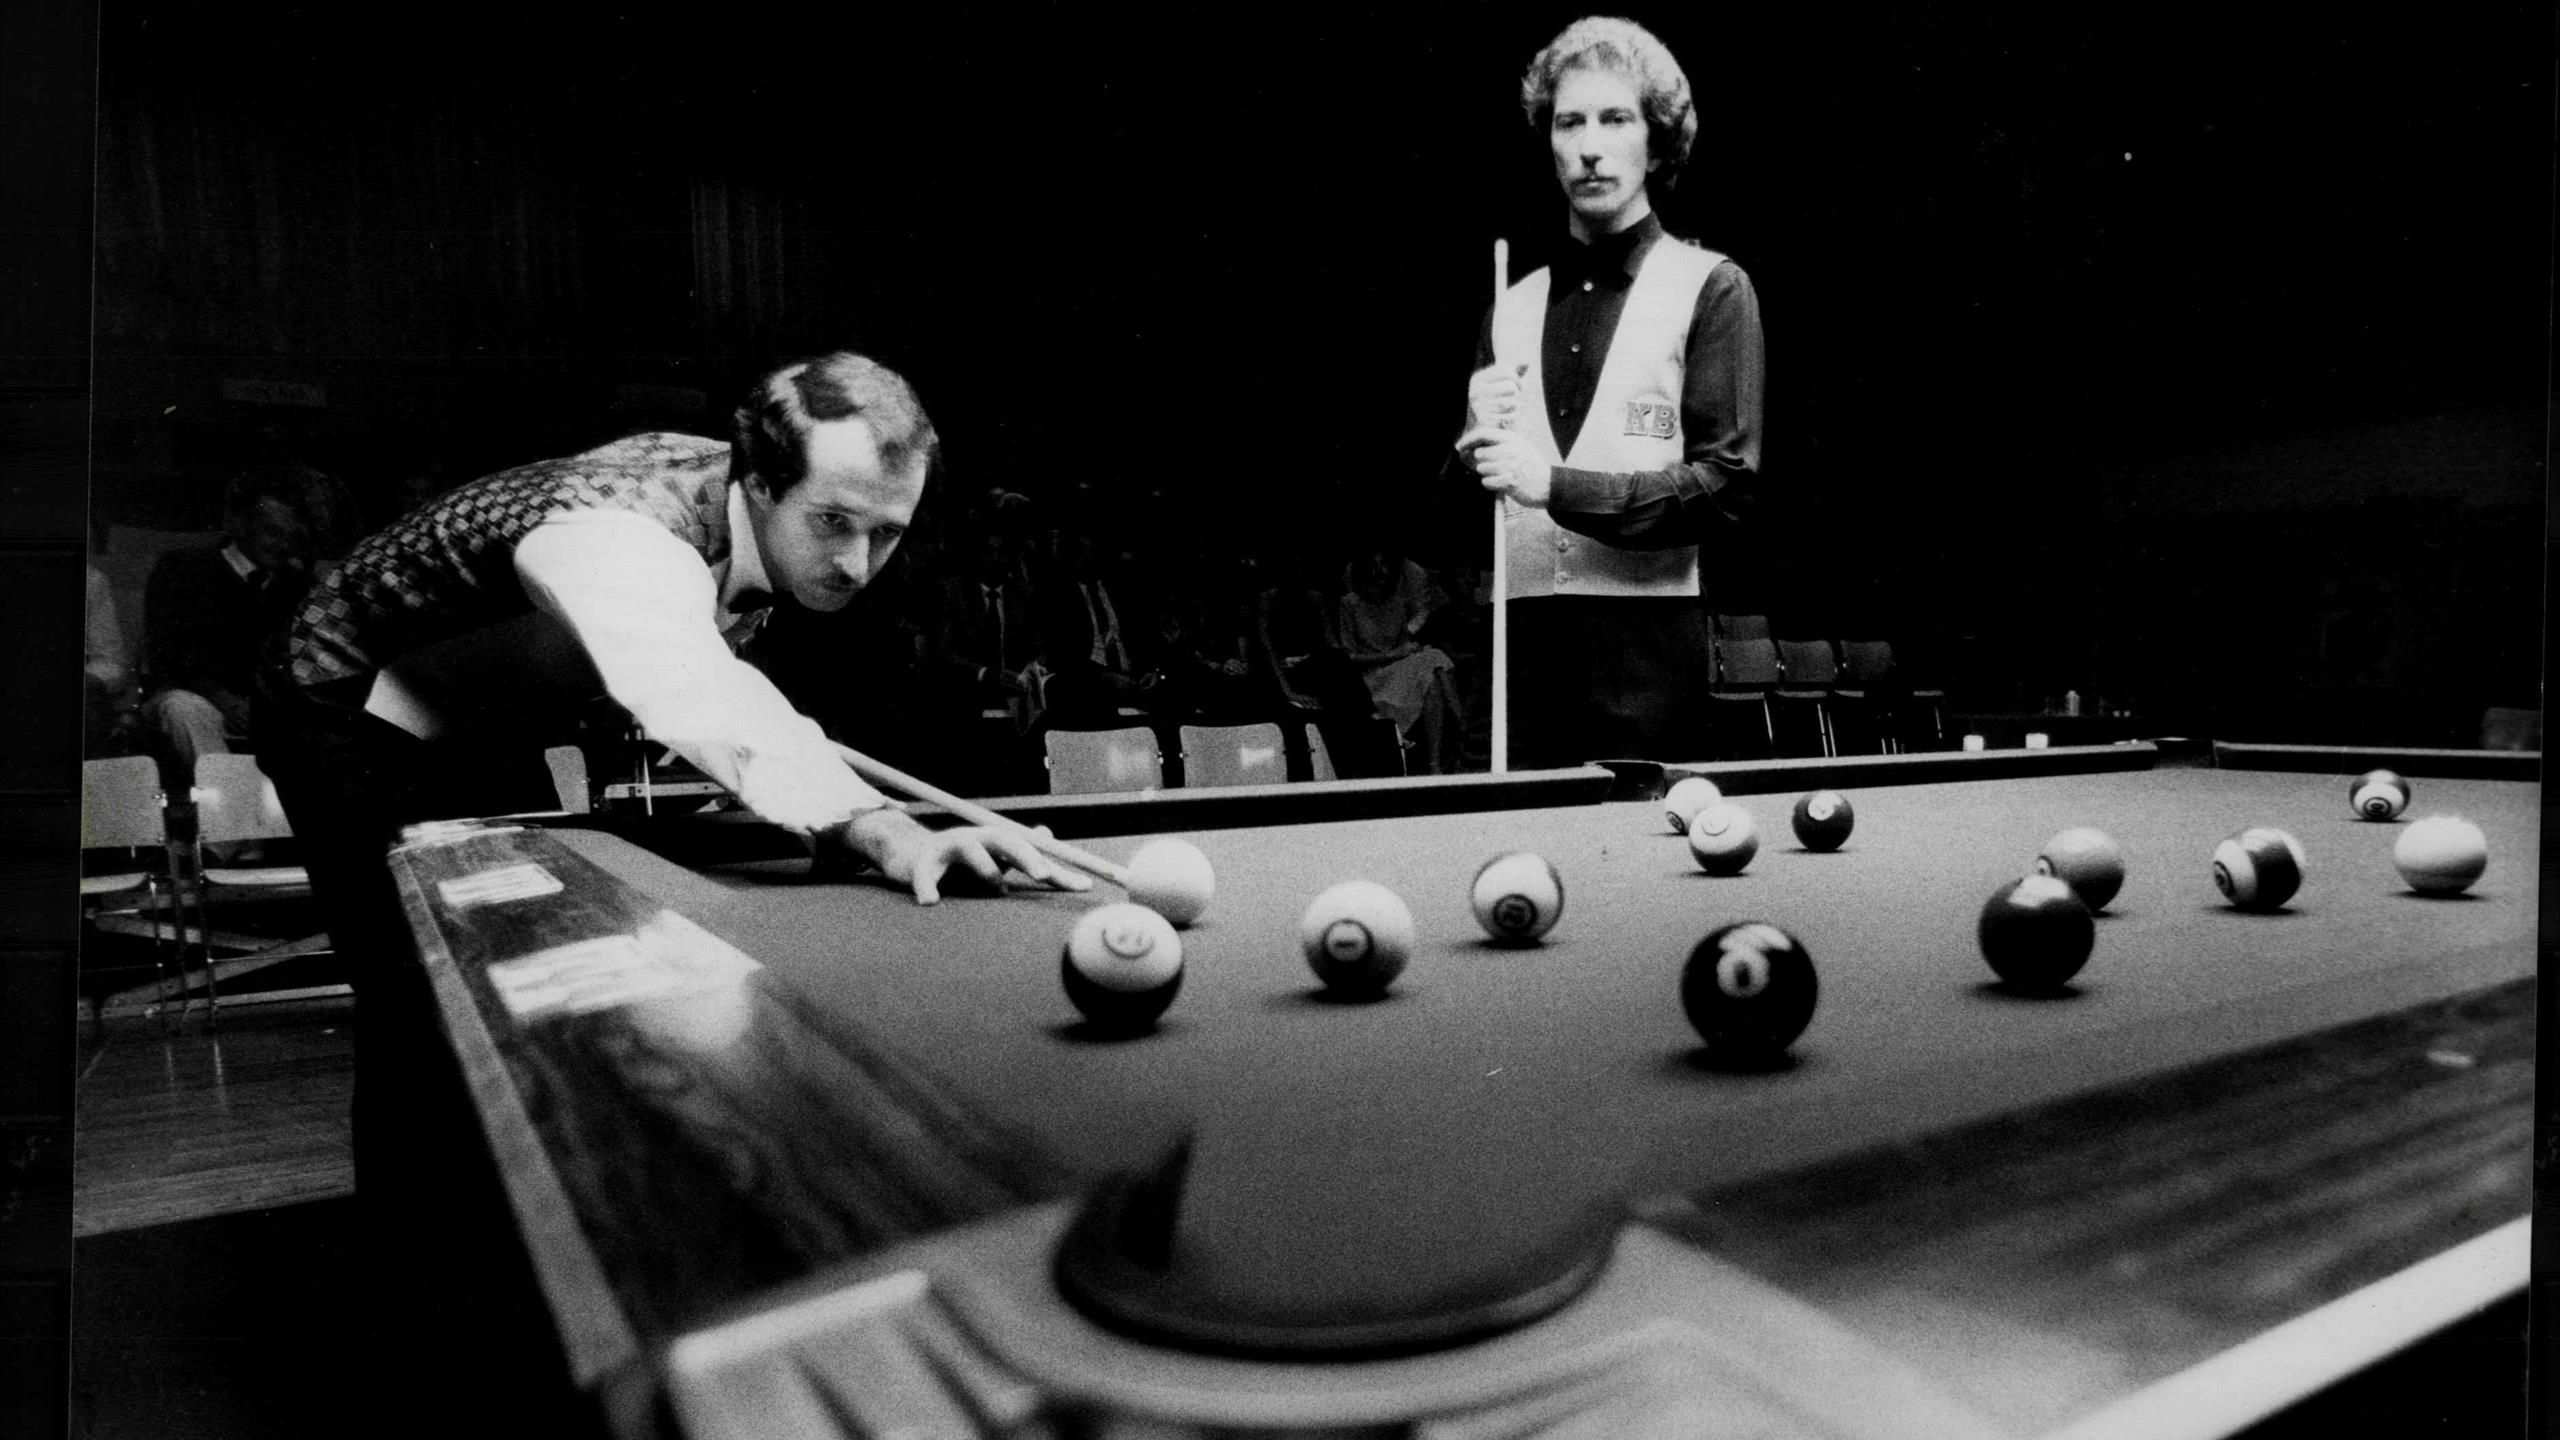 Snooker news Has any pool player conquered snooker? Judd Trump to emulate Ronnie OSullivan, Mark Selby and Steve Davis